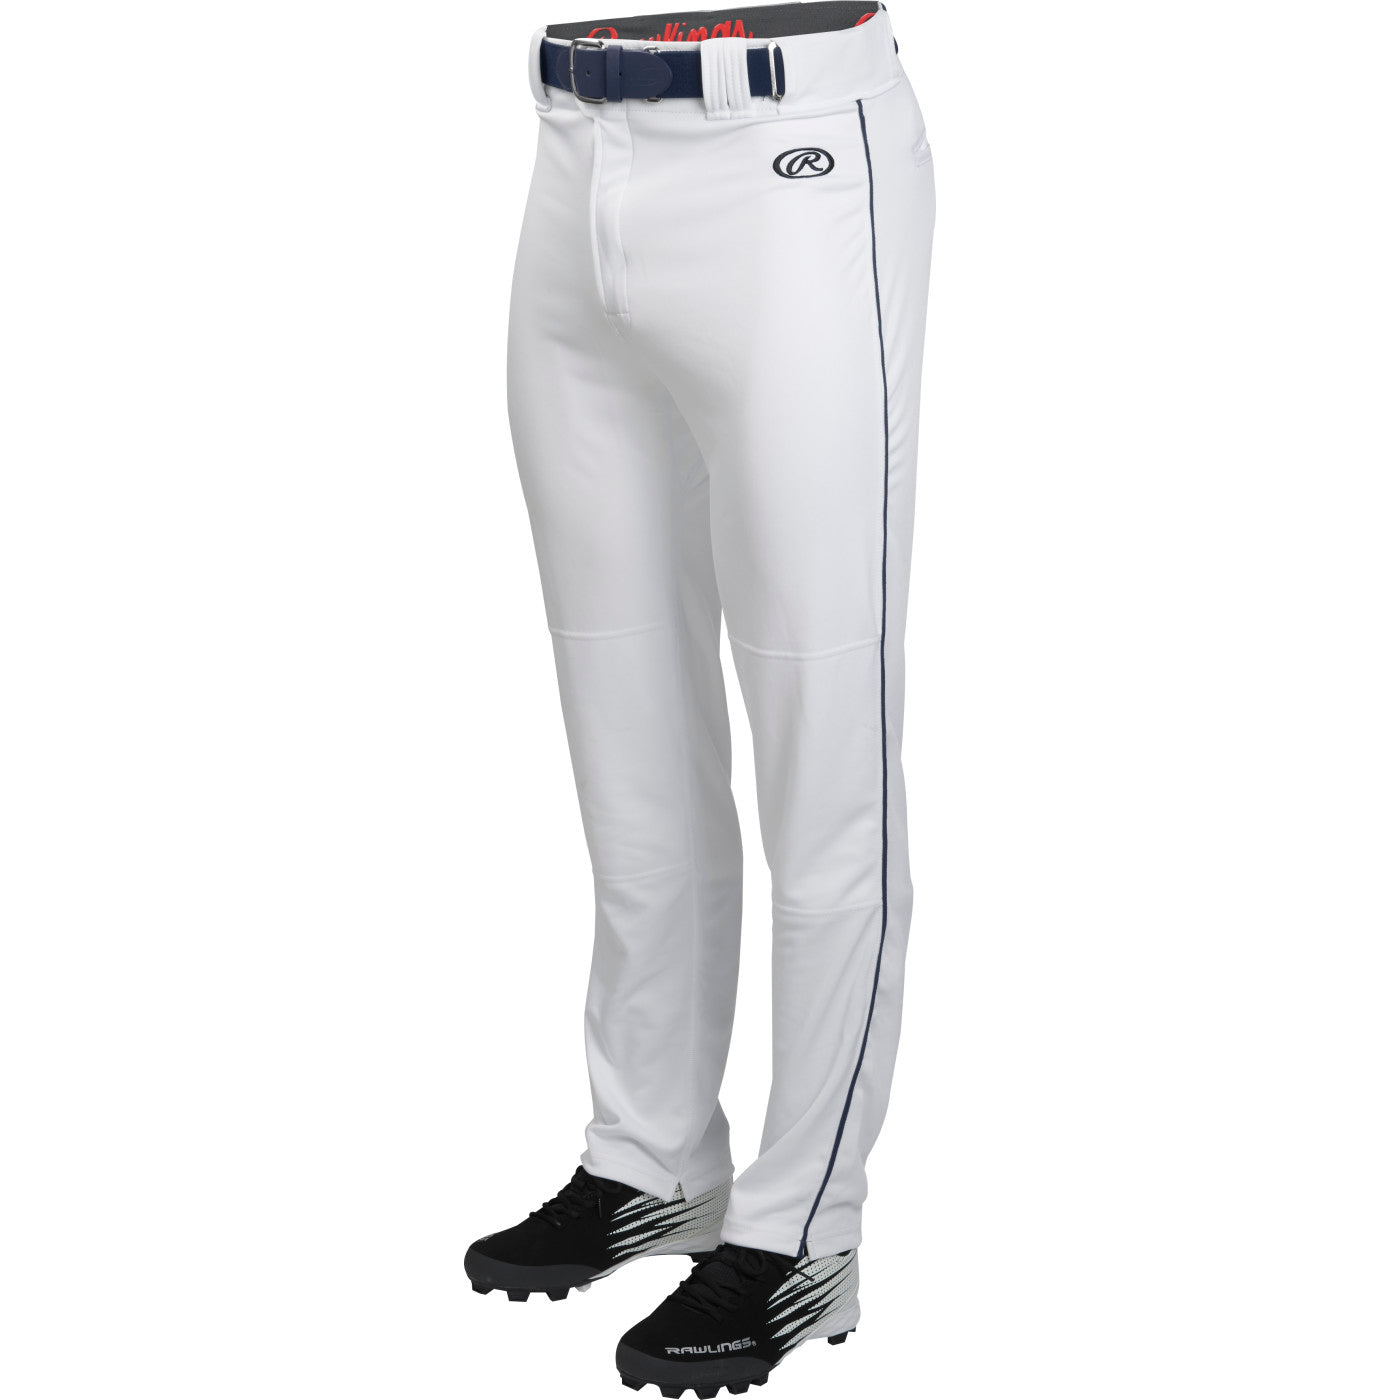 Rawlings Launch Adult Knicker Baseball Pants White Or Grey Lnchkp S 2x Online Exclusive Best 3470